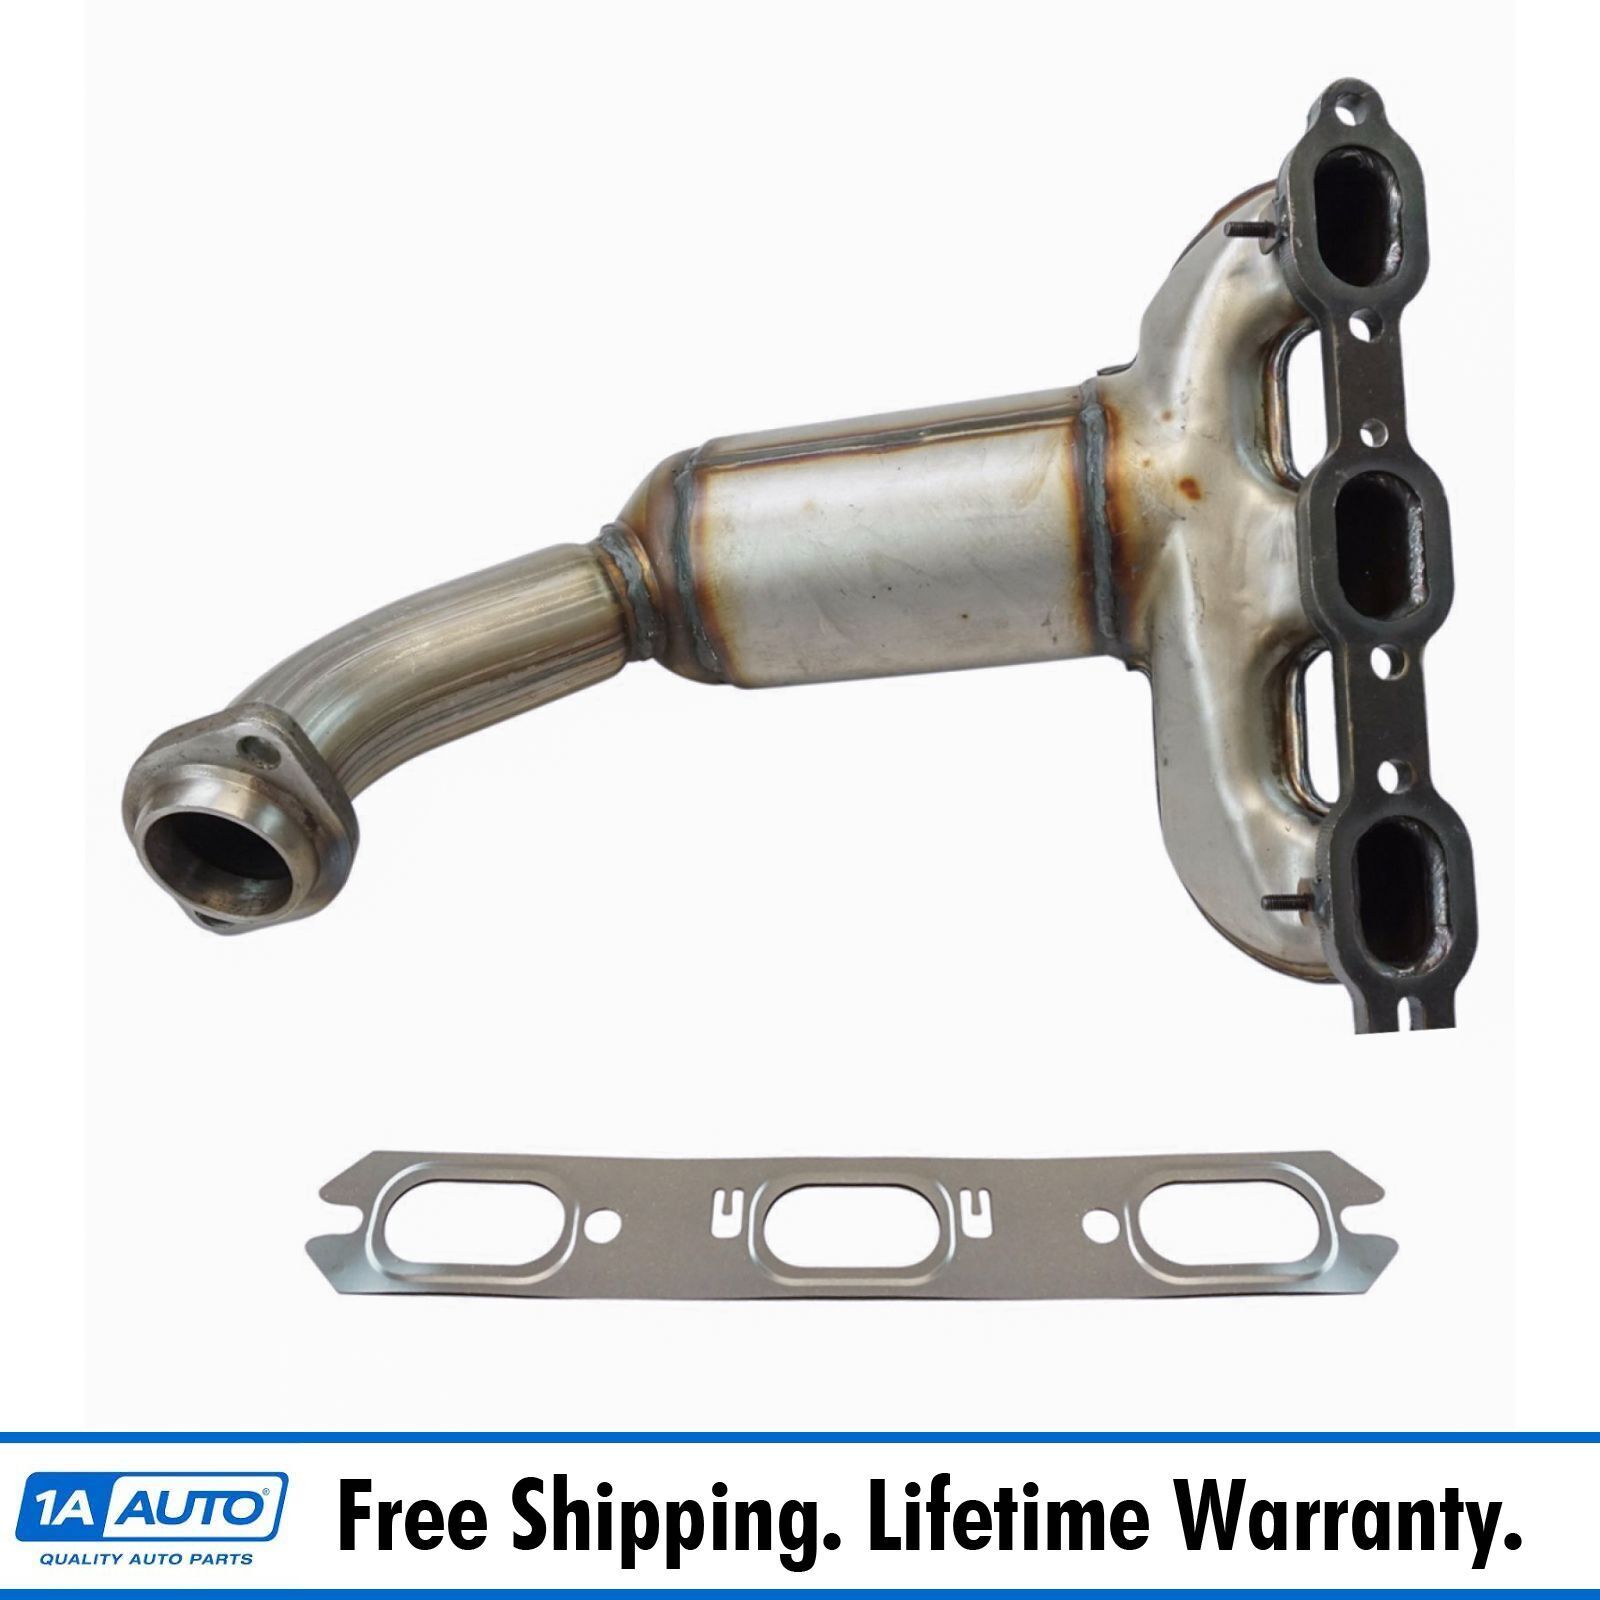 Rear Exhaust Manifold with Catalytic Converter & Gasket for Dodge Chrysler New